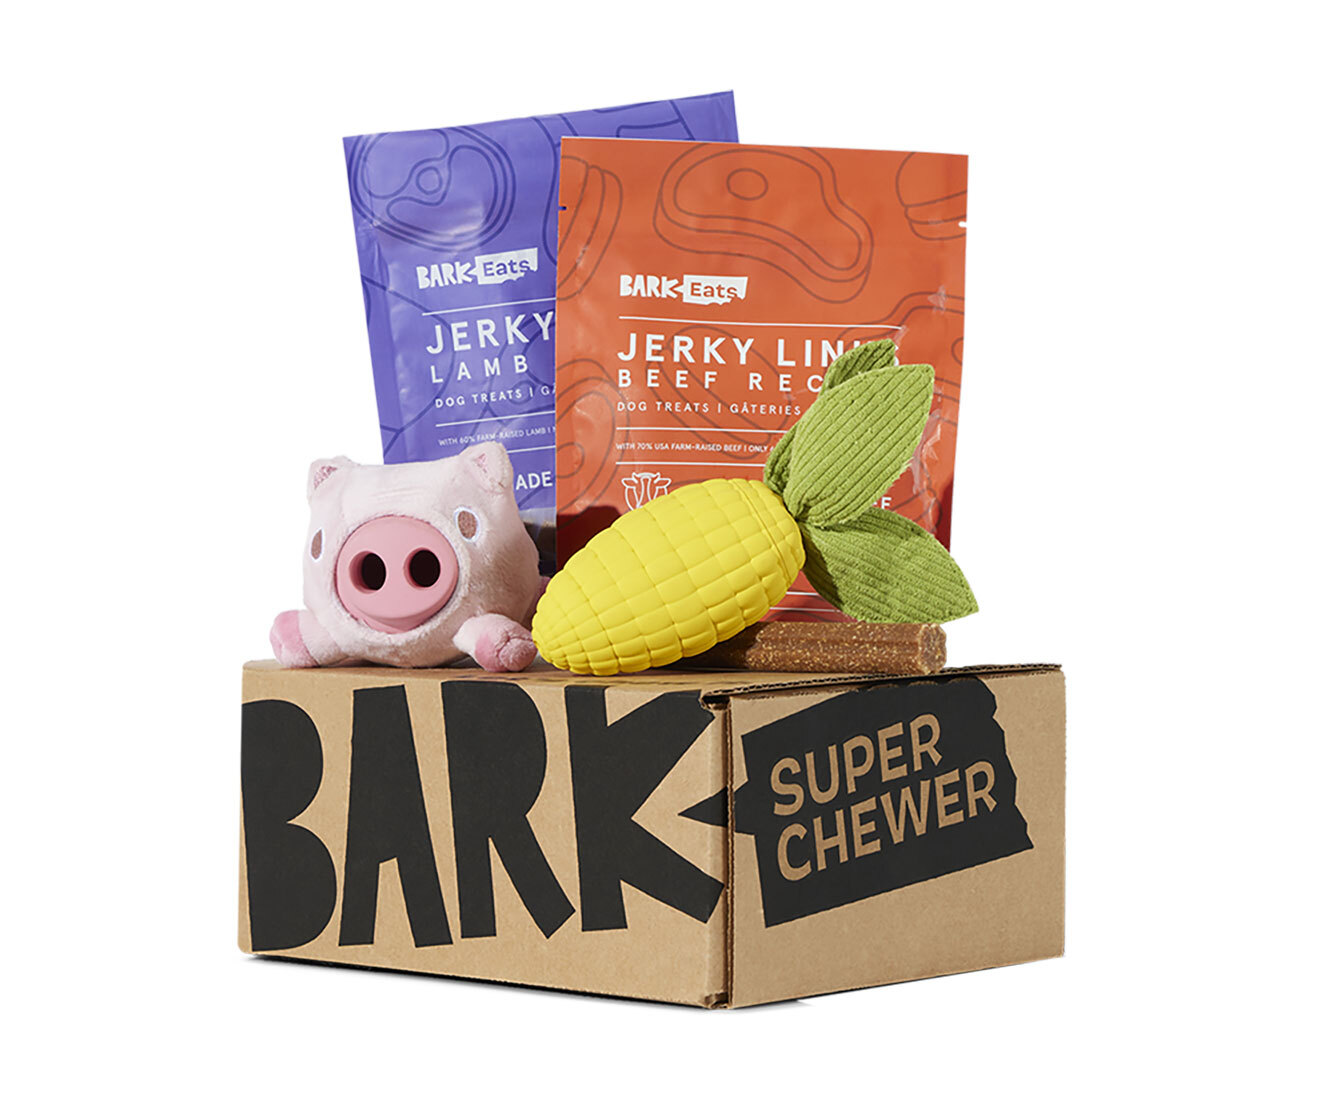 Super Chewer box full of tough toys and meaty treats